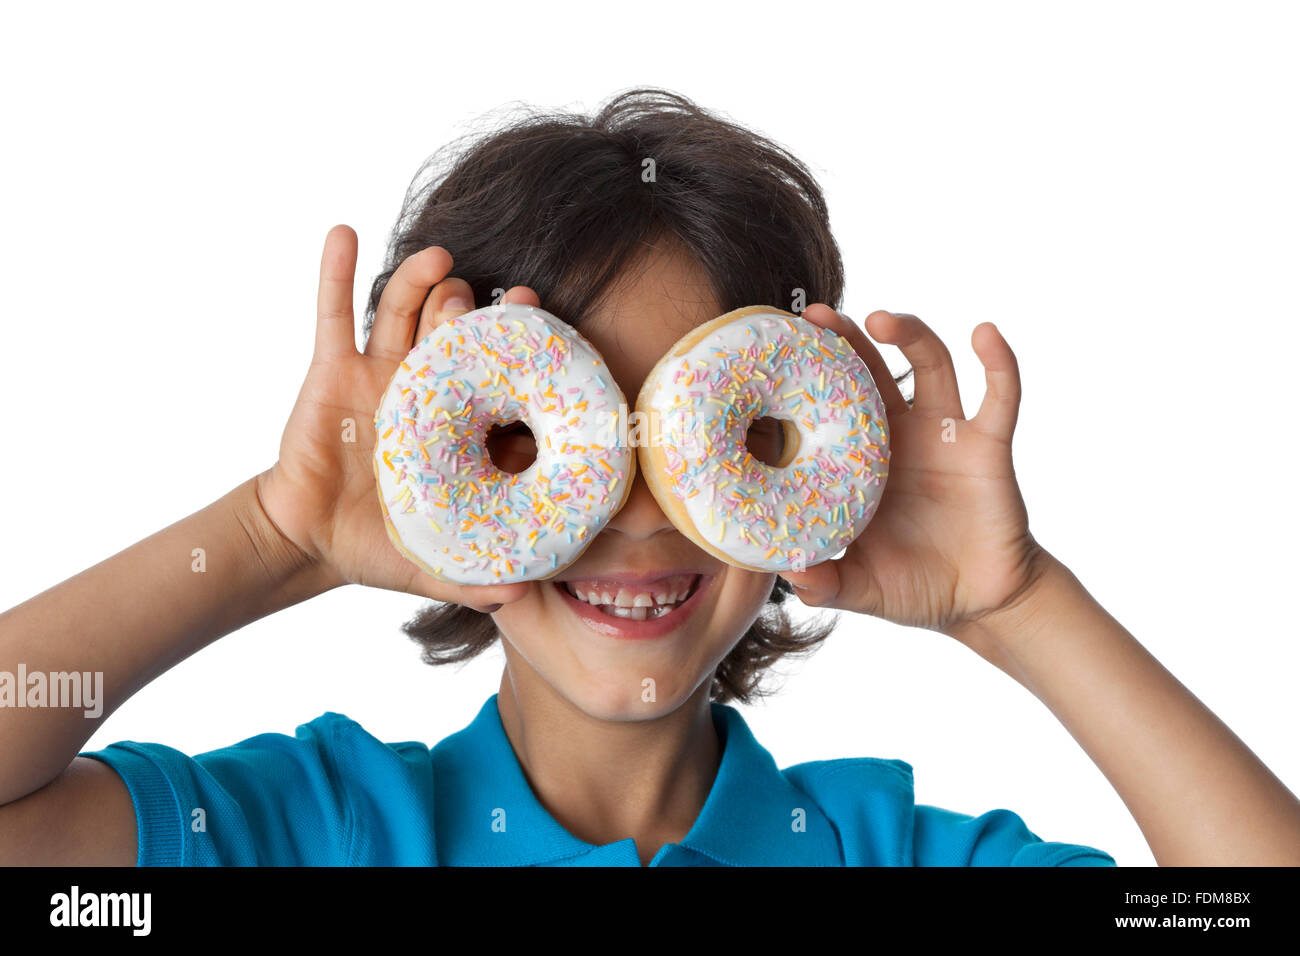 Little boy making fun with donuts on white background Stock Photo